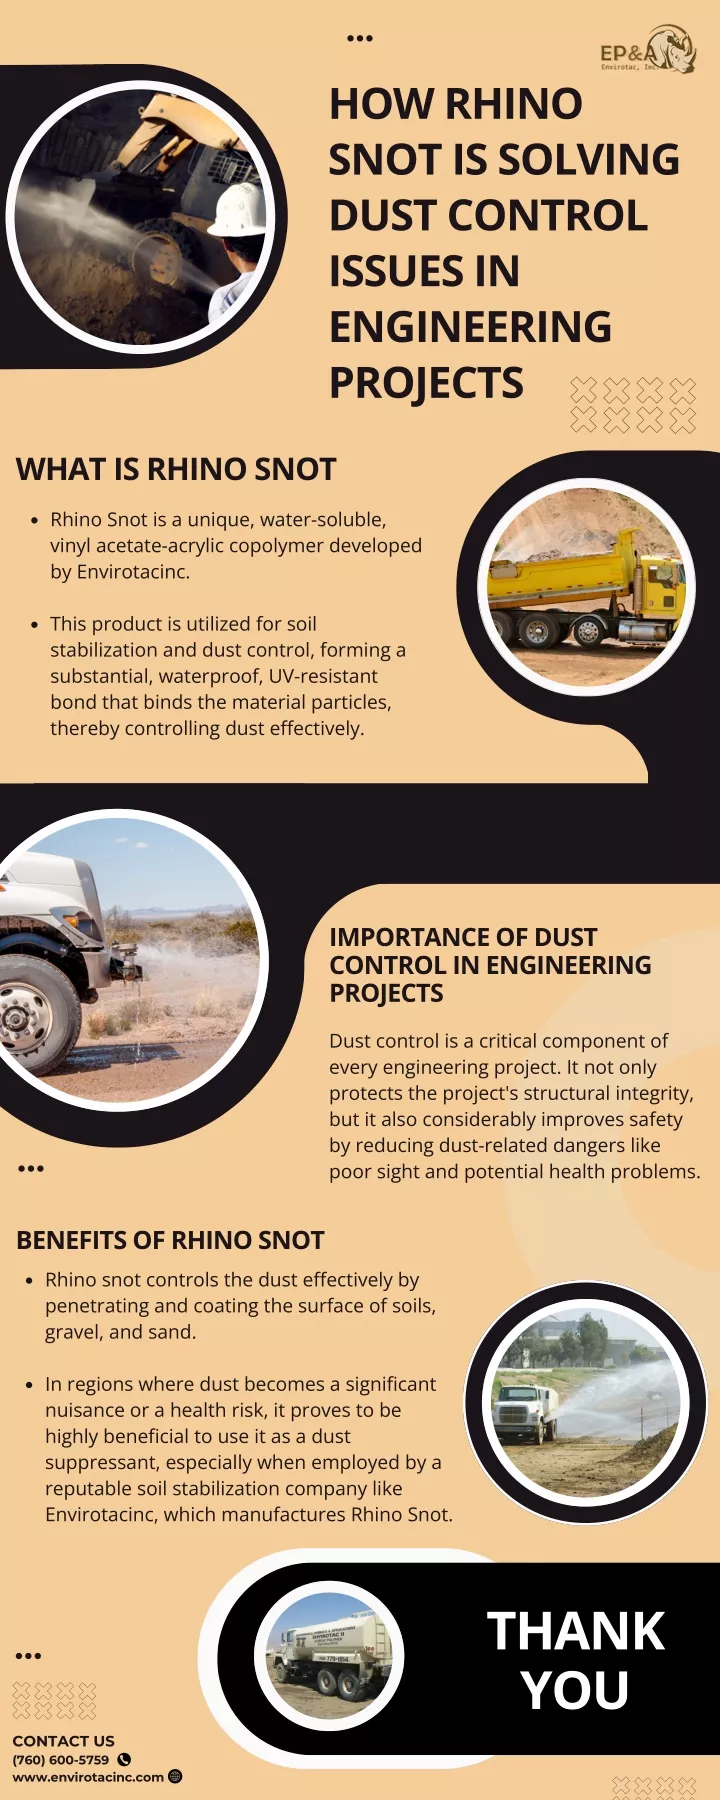 how rhino snot is solving dust control issues